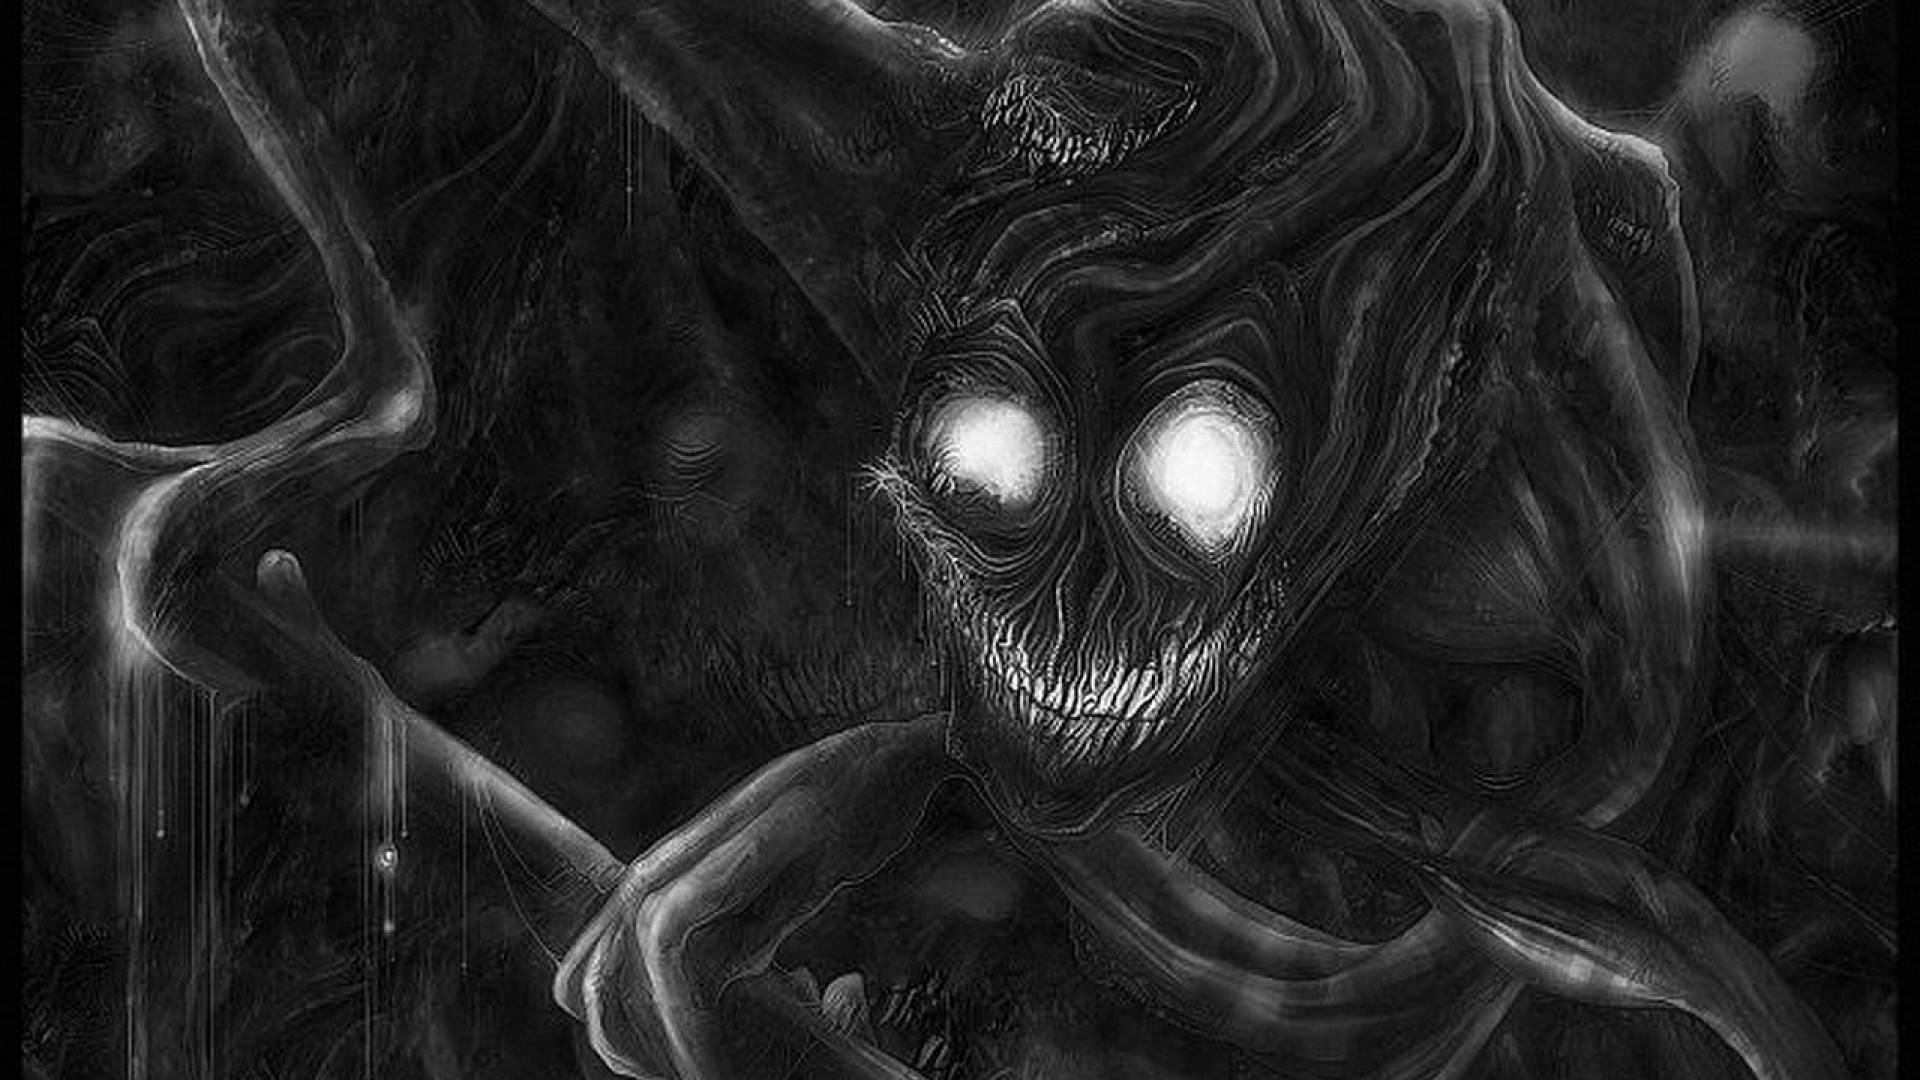 New Scary WallPapers Dark Horror HD Backgrounds The Art 19201080 Scary Wallpaper 48